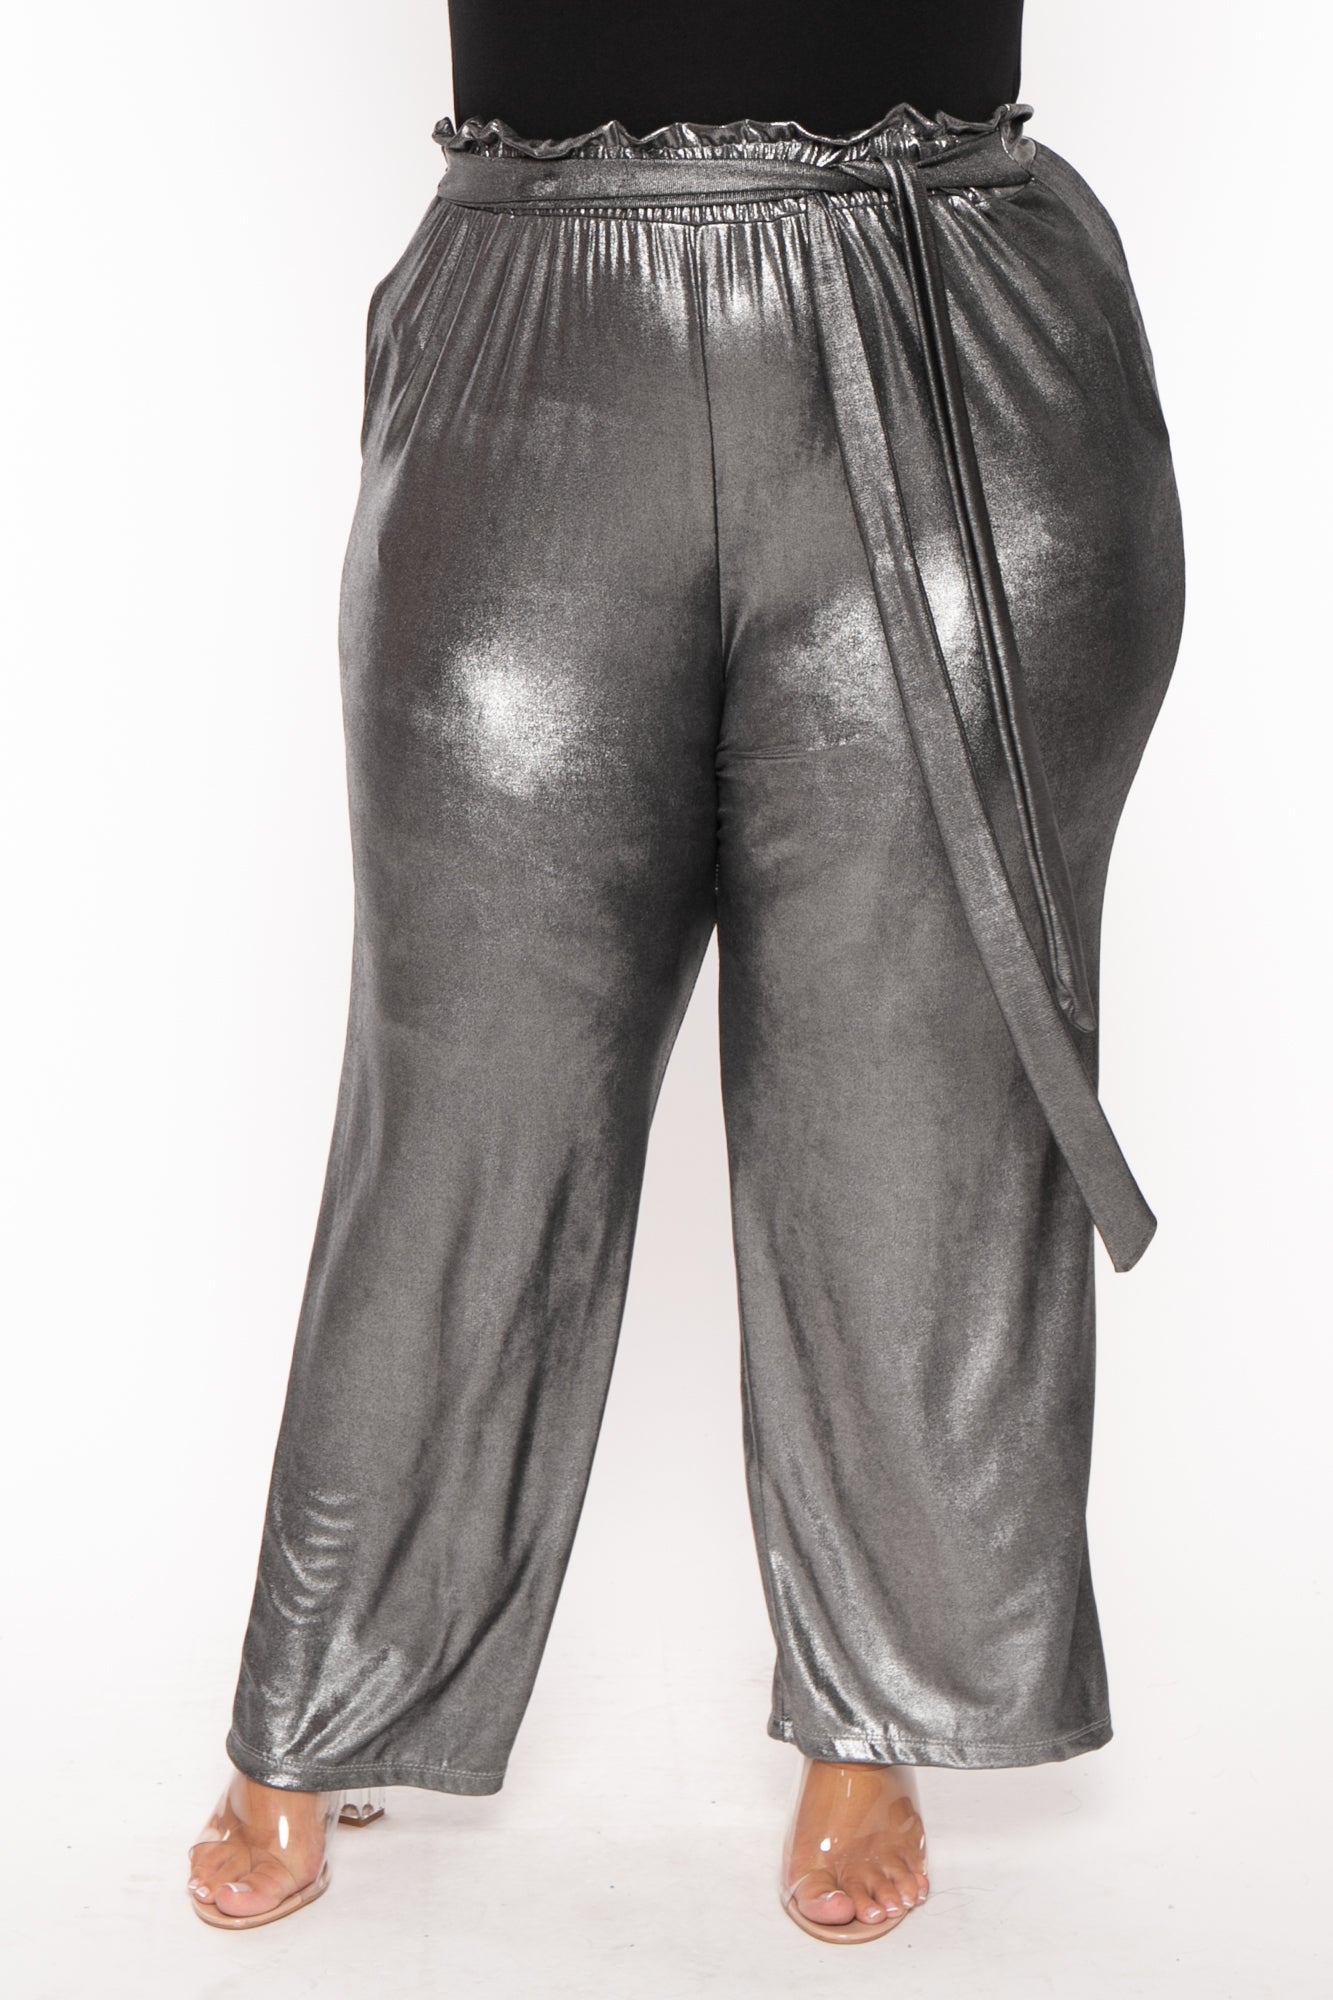 Metallic Silk Belted Pant in Gunmetal Charcoal and Gray | LAPOINTE